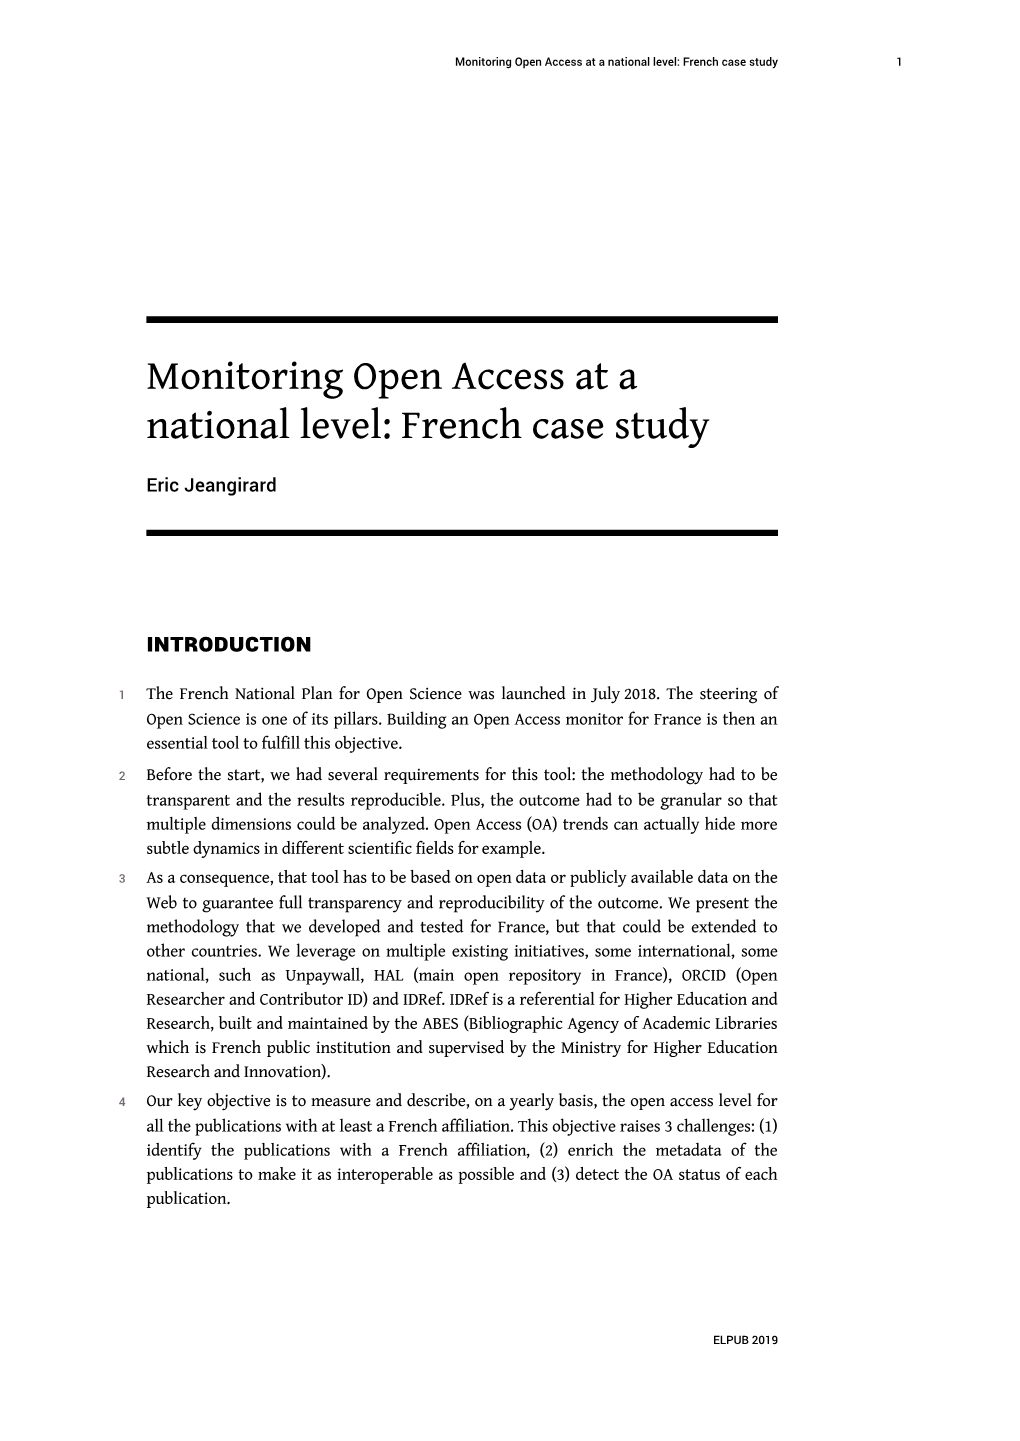 Monitoring Open Access at a National Level: French Case Study 1